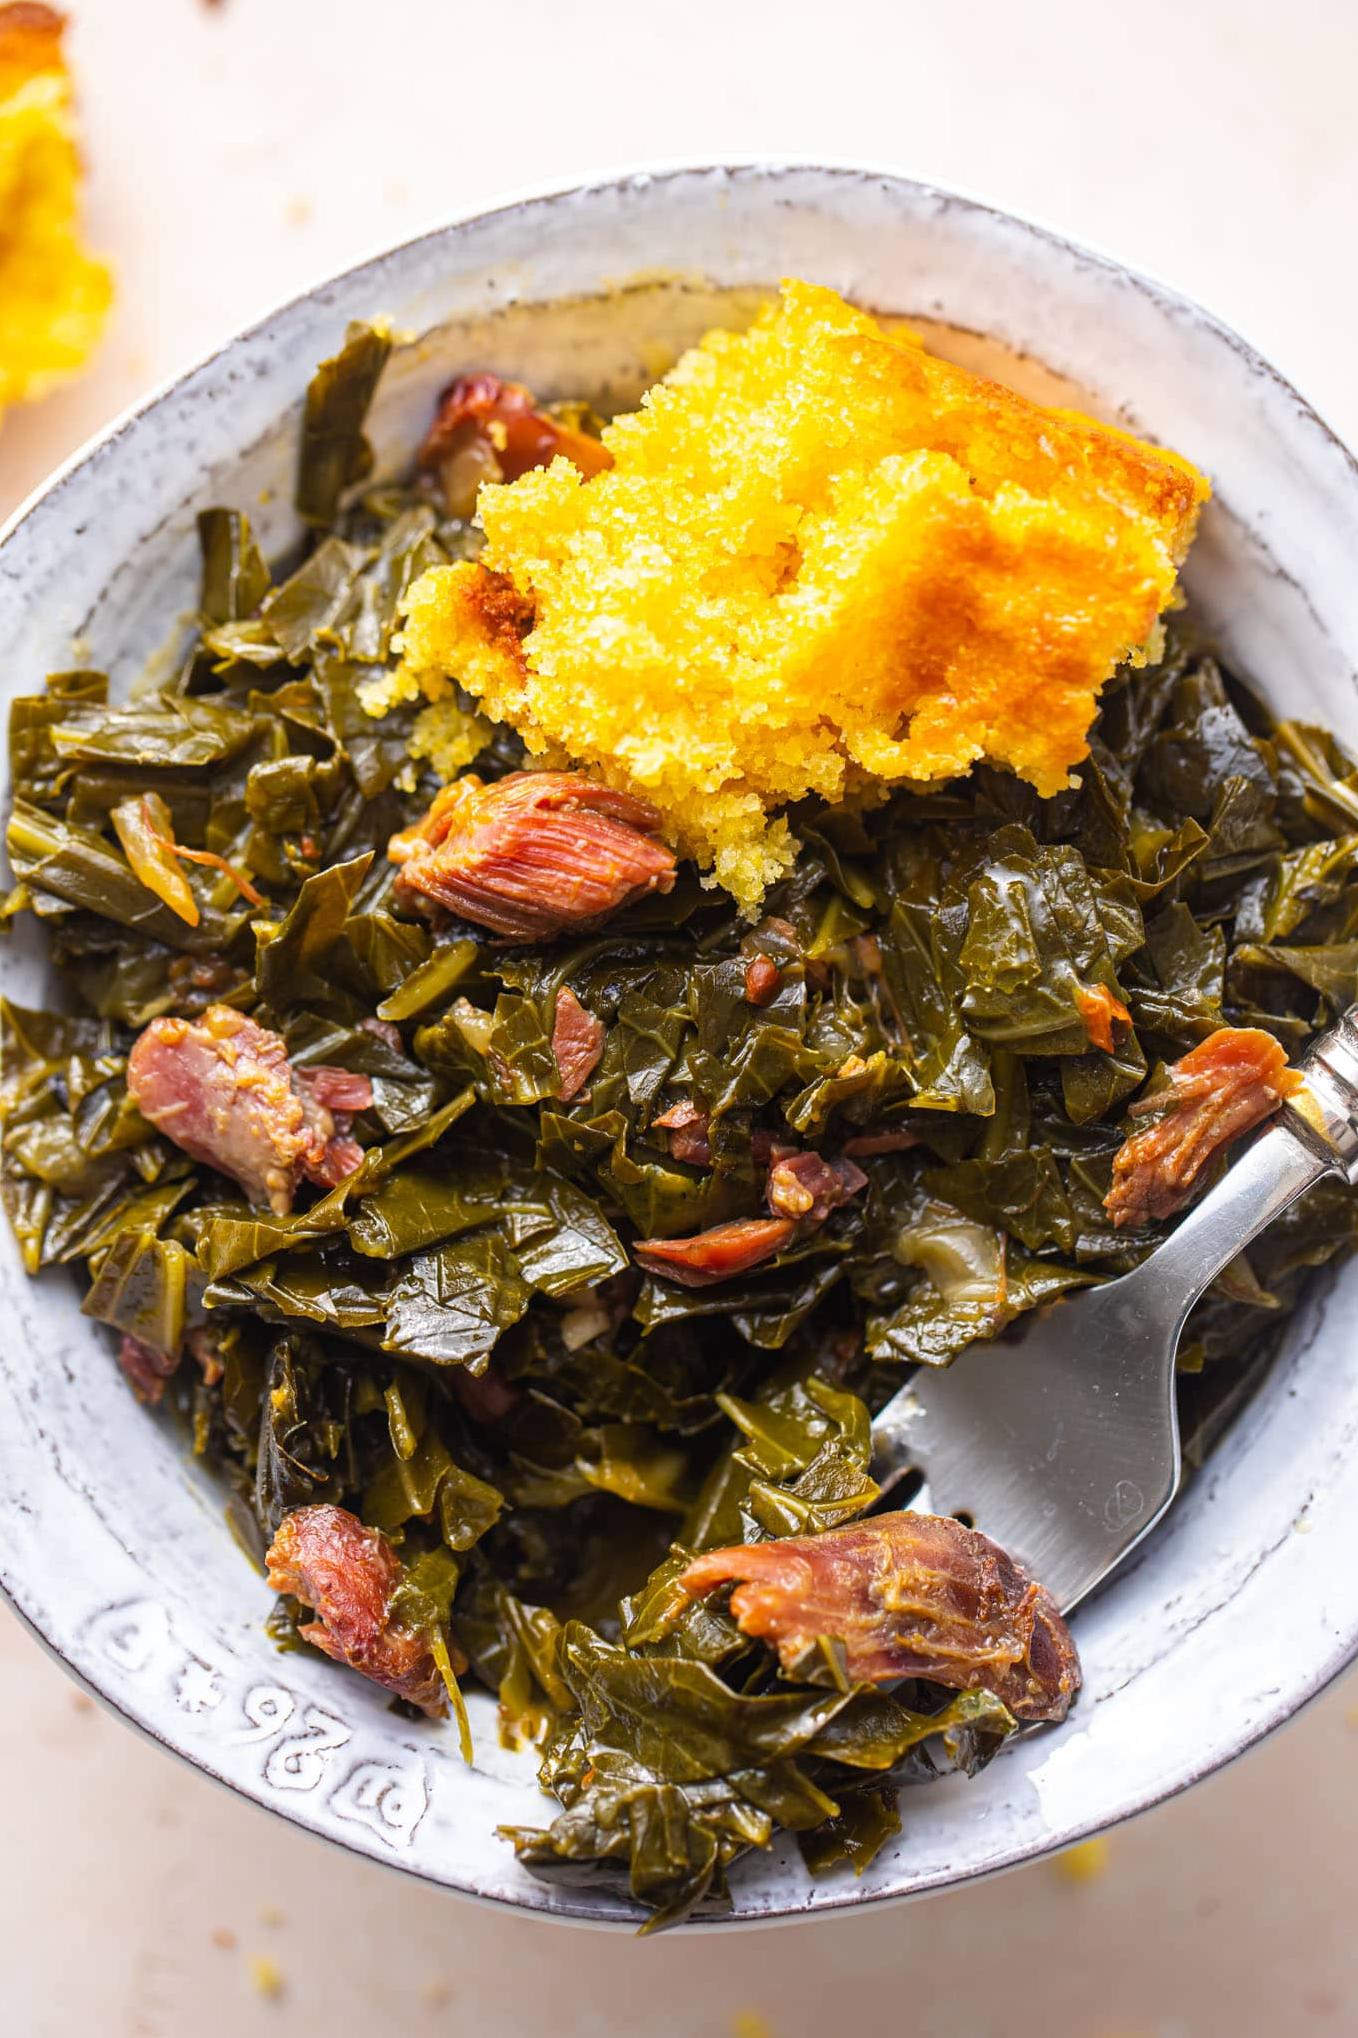  You'll love the smoky and savory aroma these greens add to your kitchen!